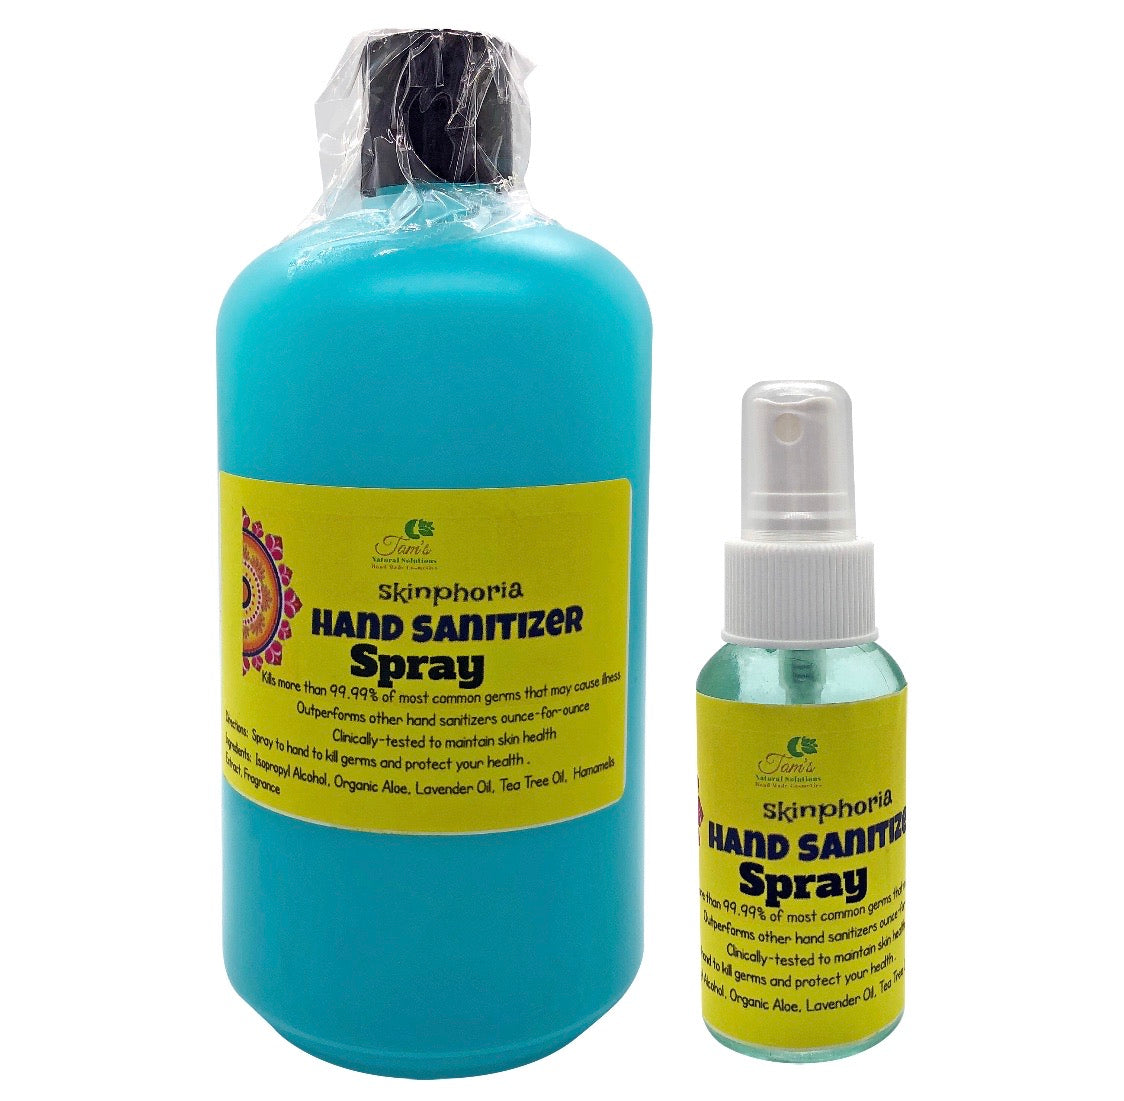 Hand Sanitizer Spray Kills 99.9% of Germs - Tam's Natural Solutions